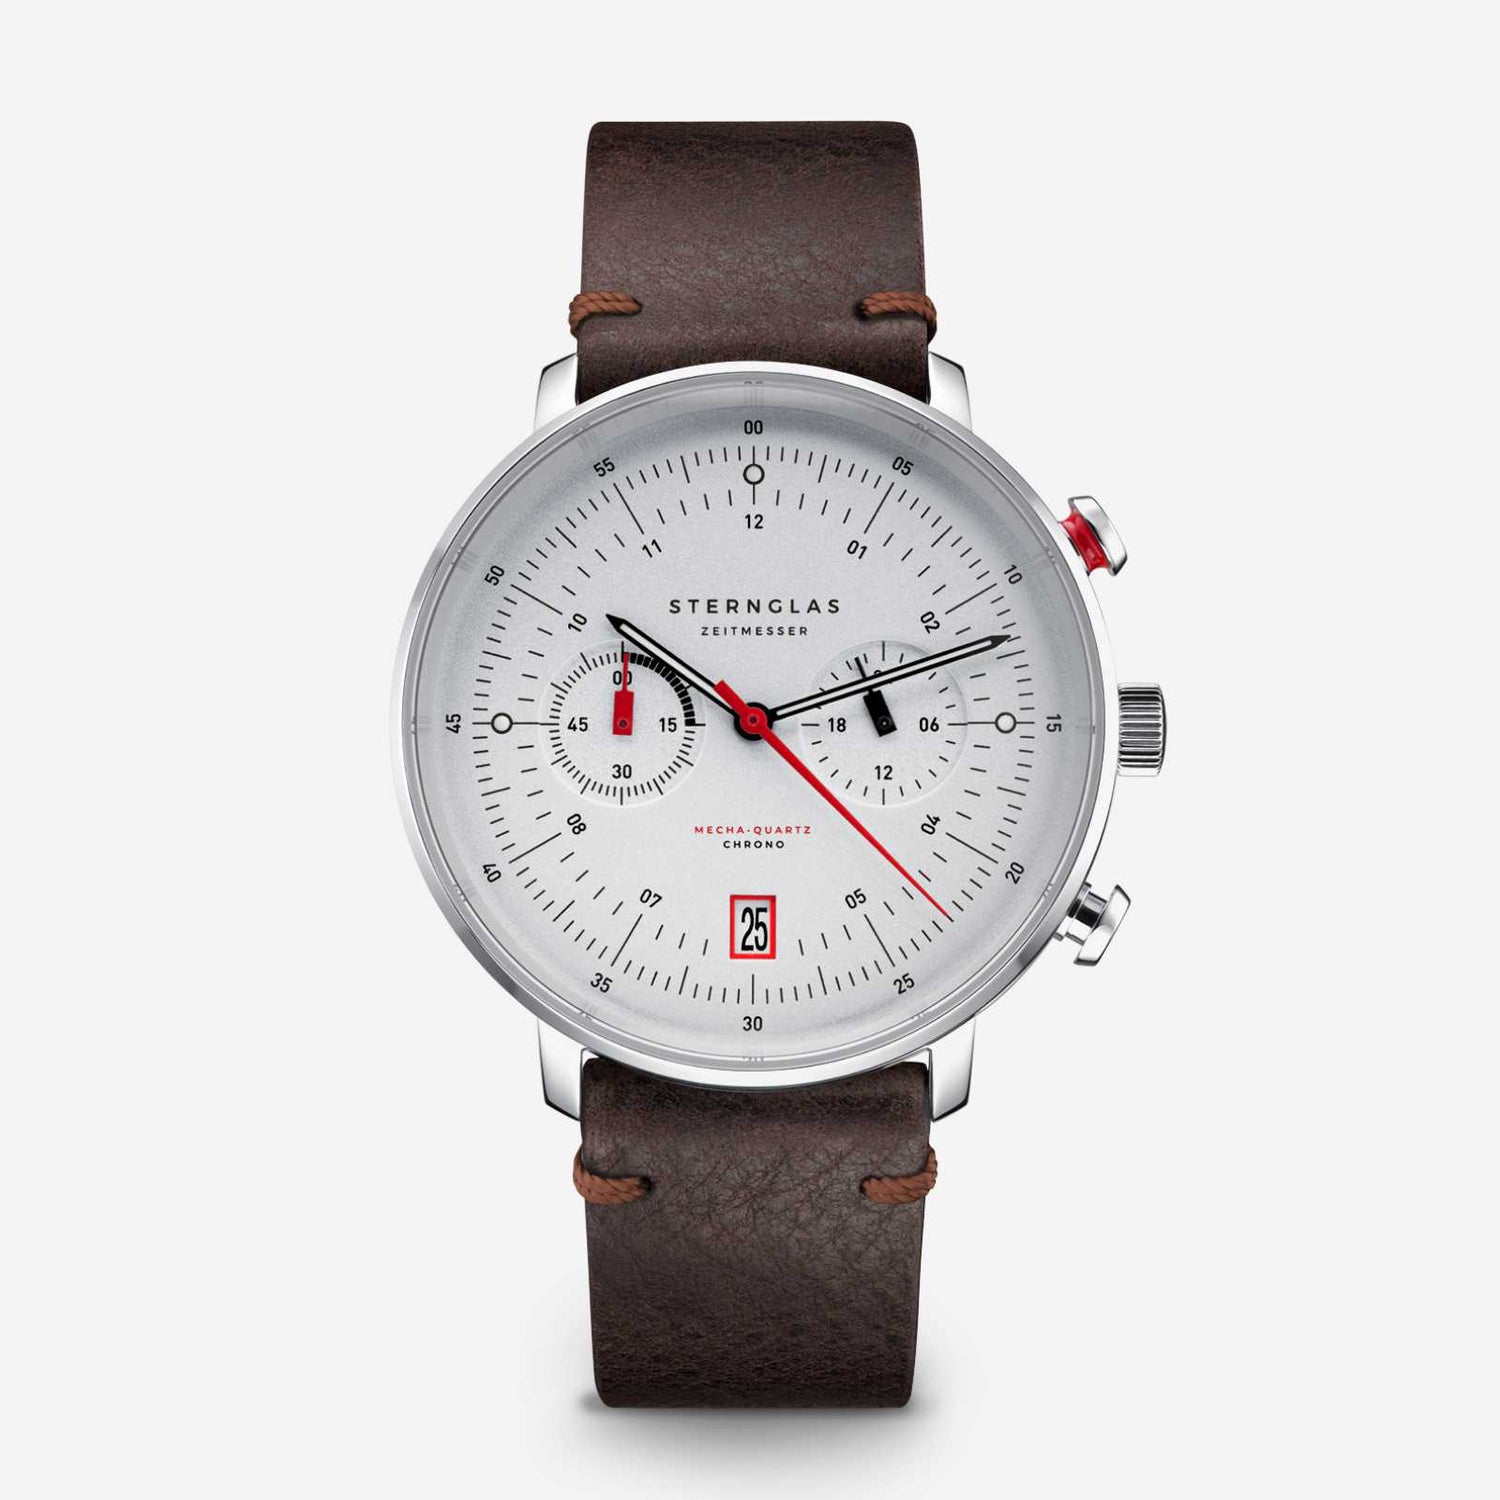 popup|Inspired by the regatta chronographs of the 70s..|..clear lines and the satin-finished dial lend a timeless elegance. Details such as the red chrono hand and the red date window add a sporty touch.